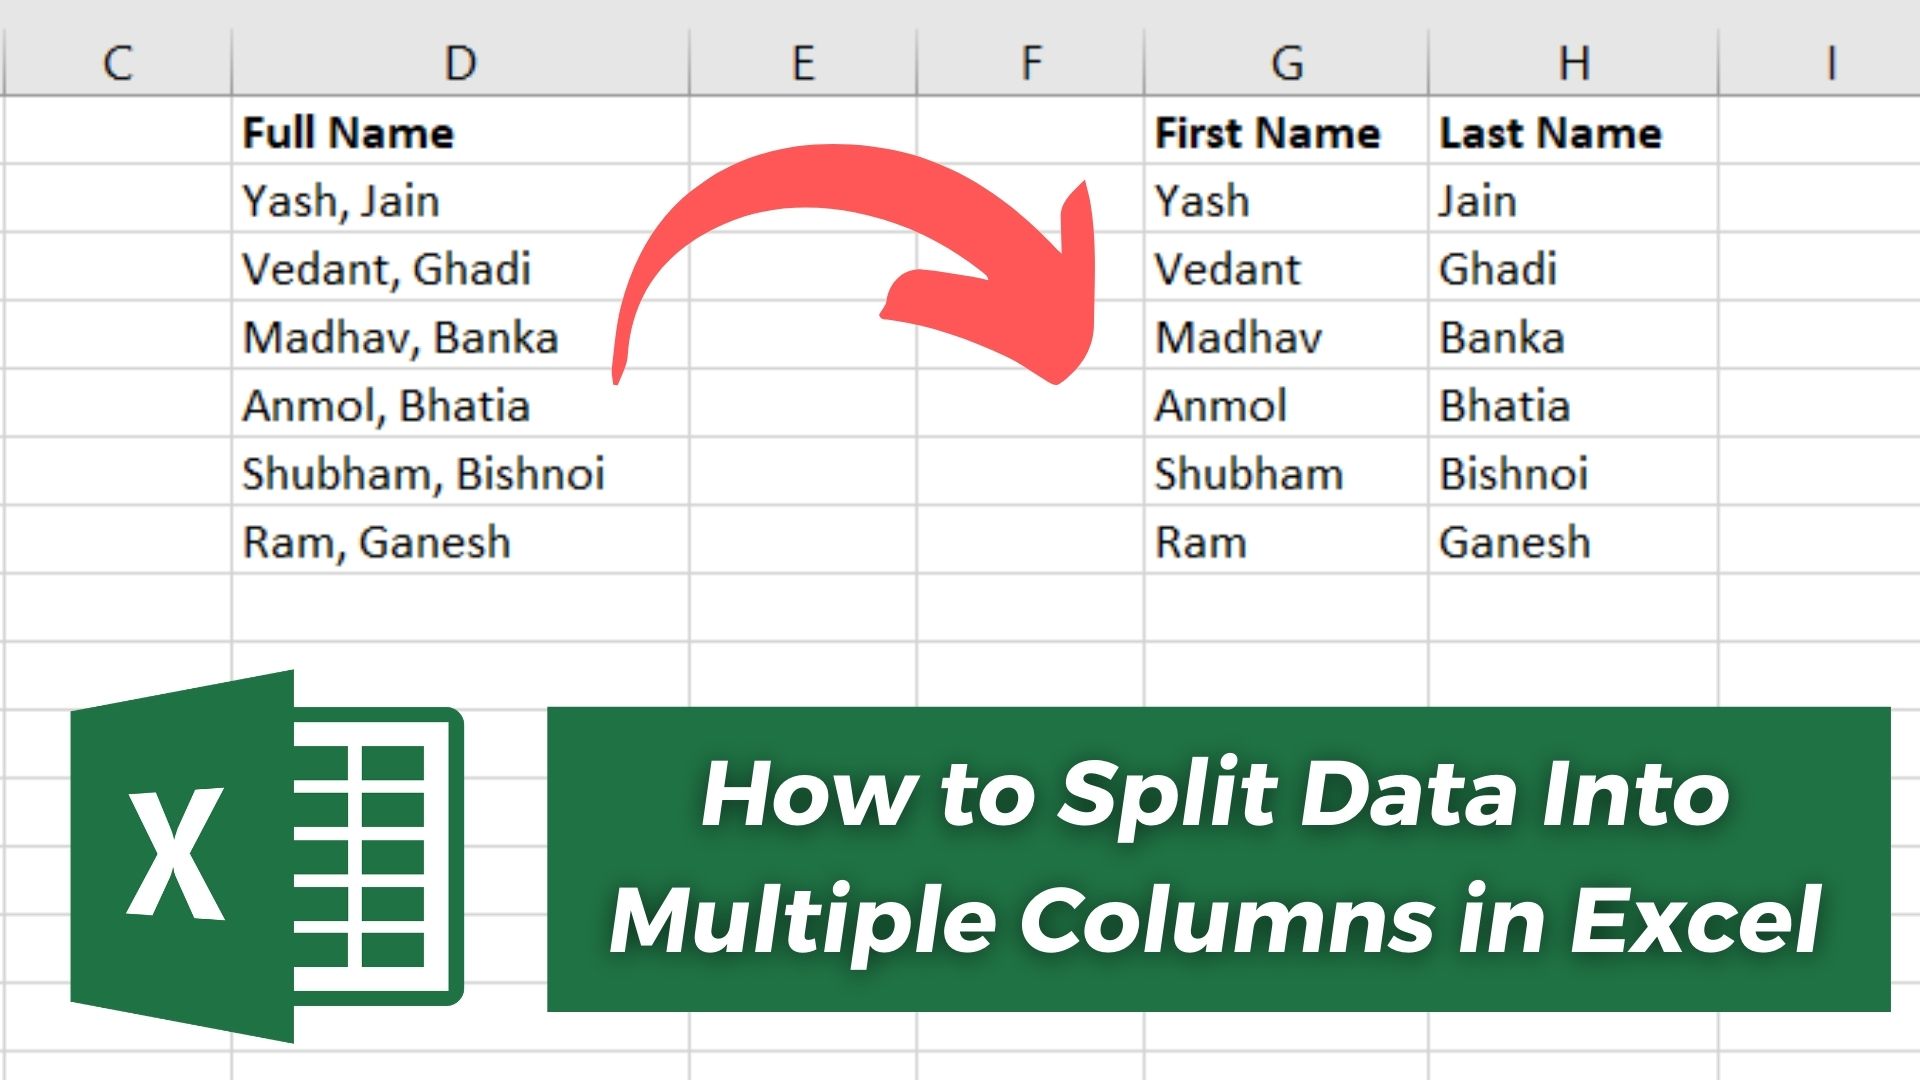 2-fast-means-to-split-an-excel-worksheet-s-contents-into-multiple-workbooks-based-on-a-specific